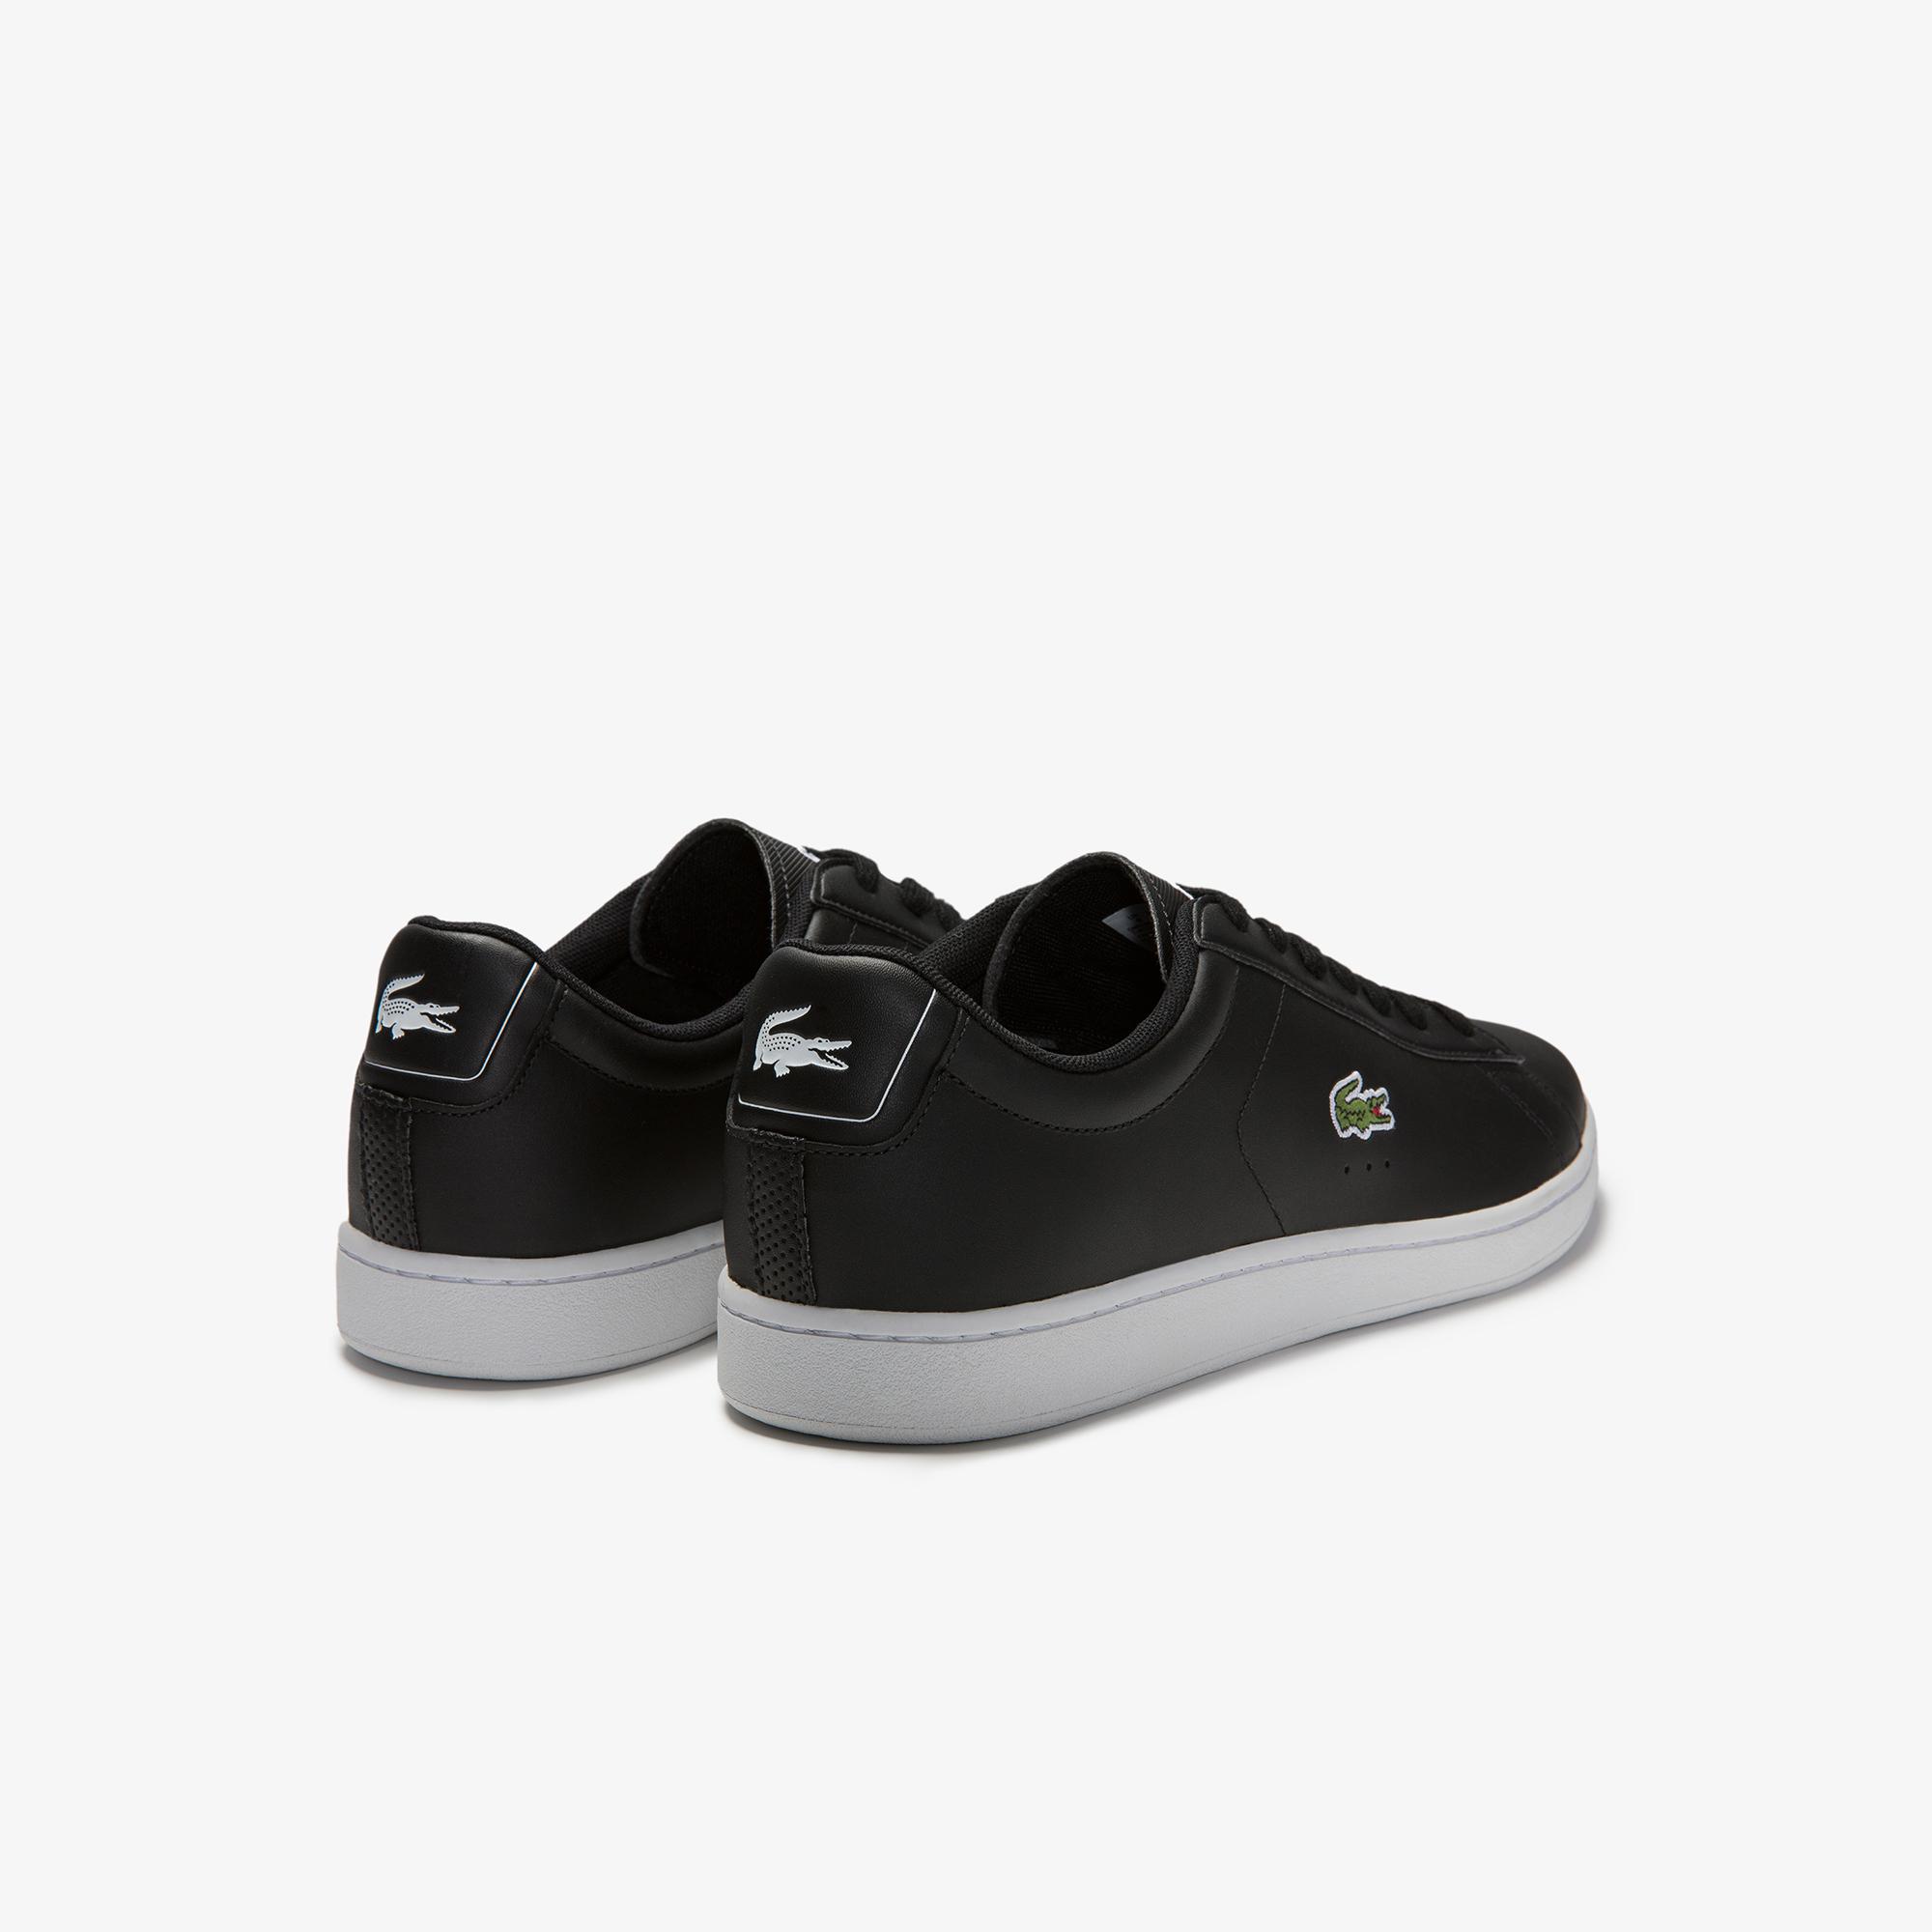 Lacoste Men's Carnaby Evo Textured Leather Sneakers